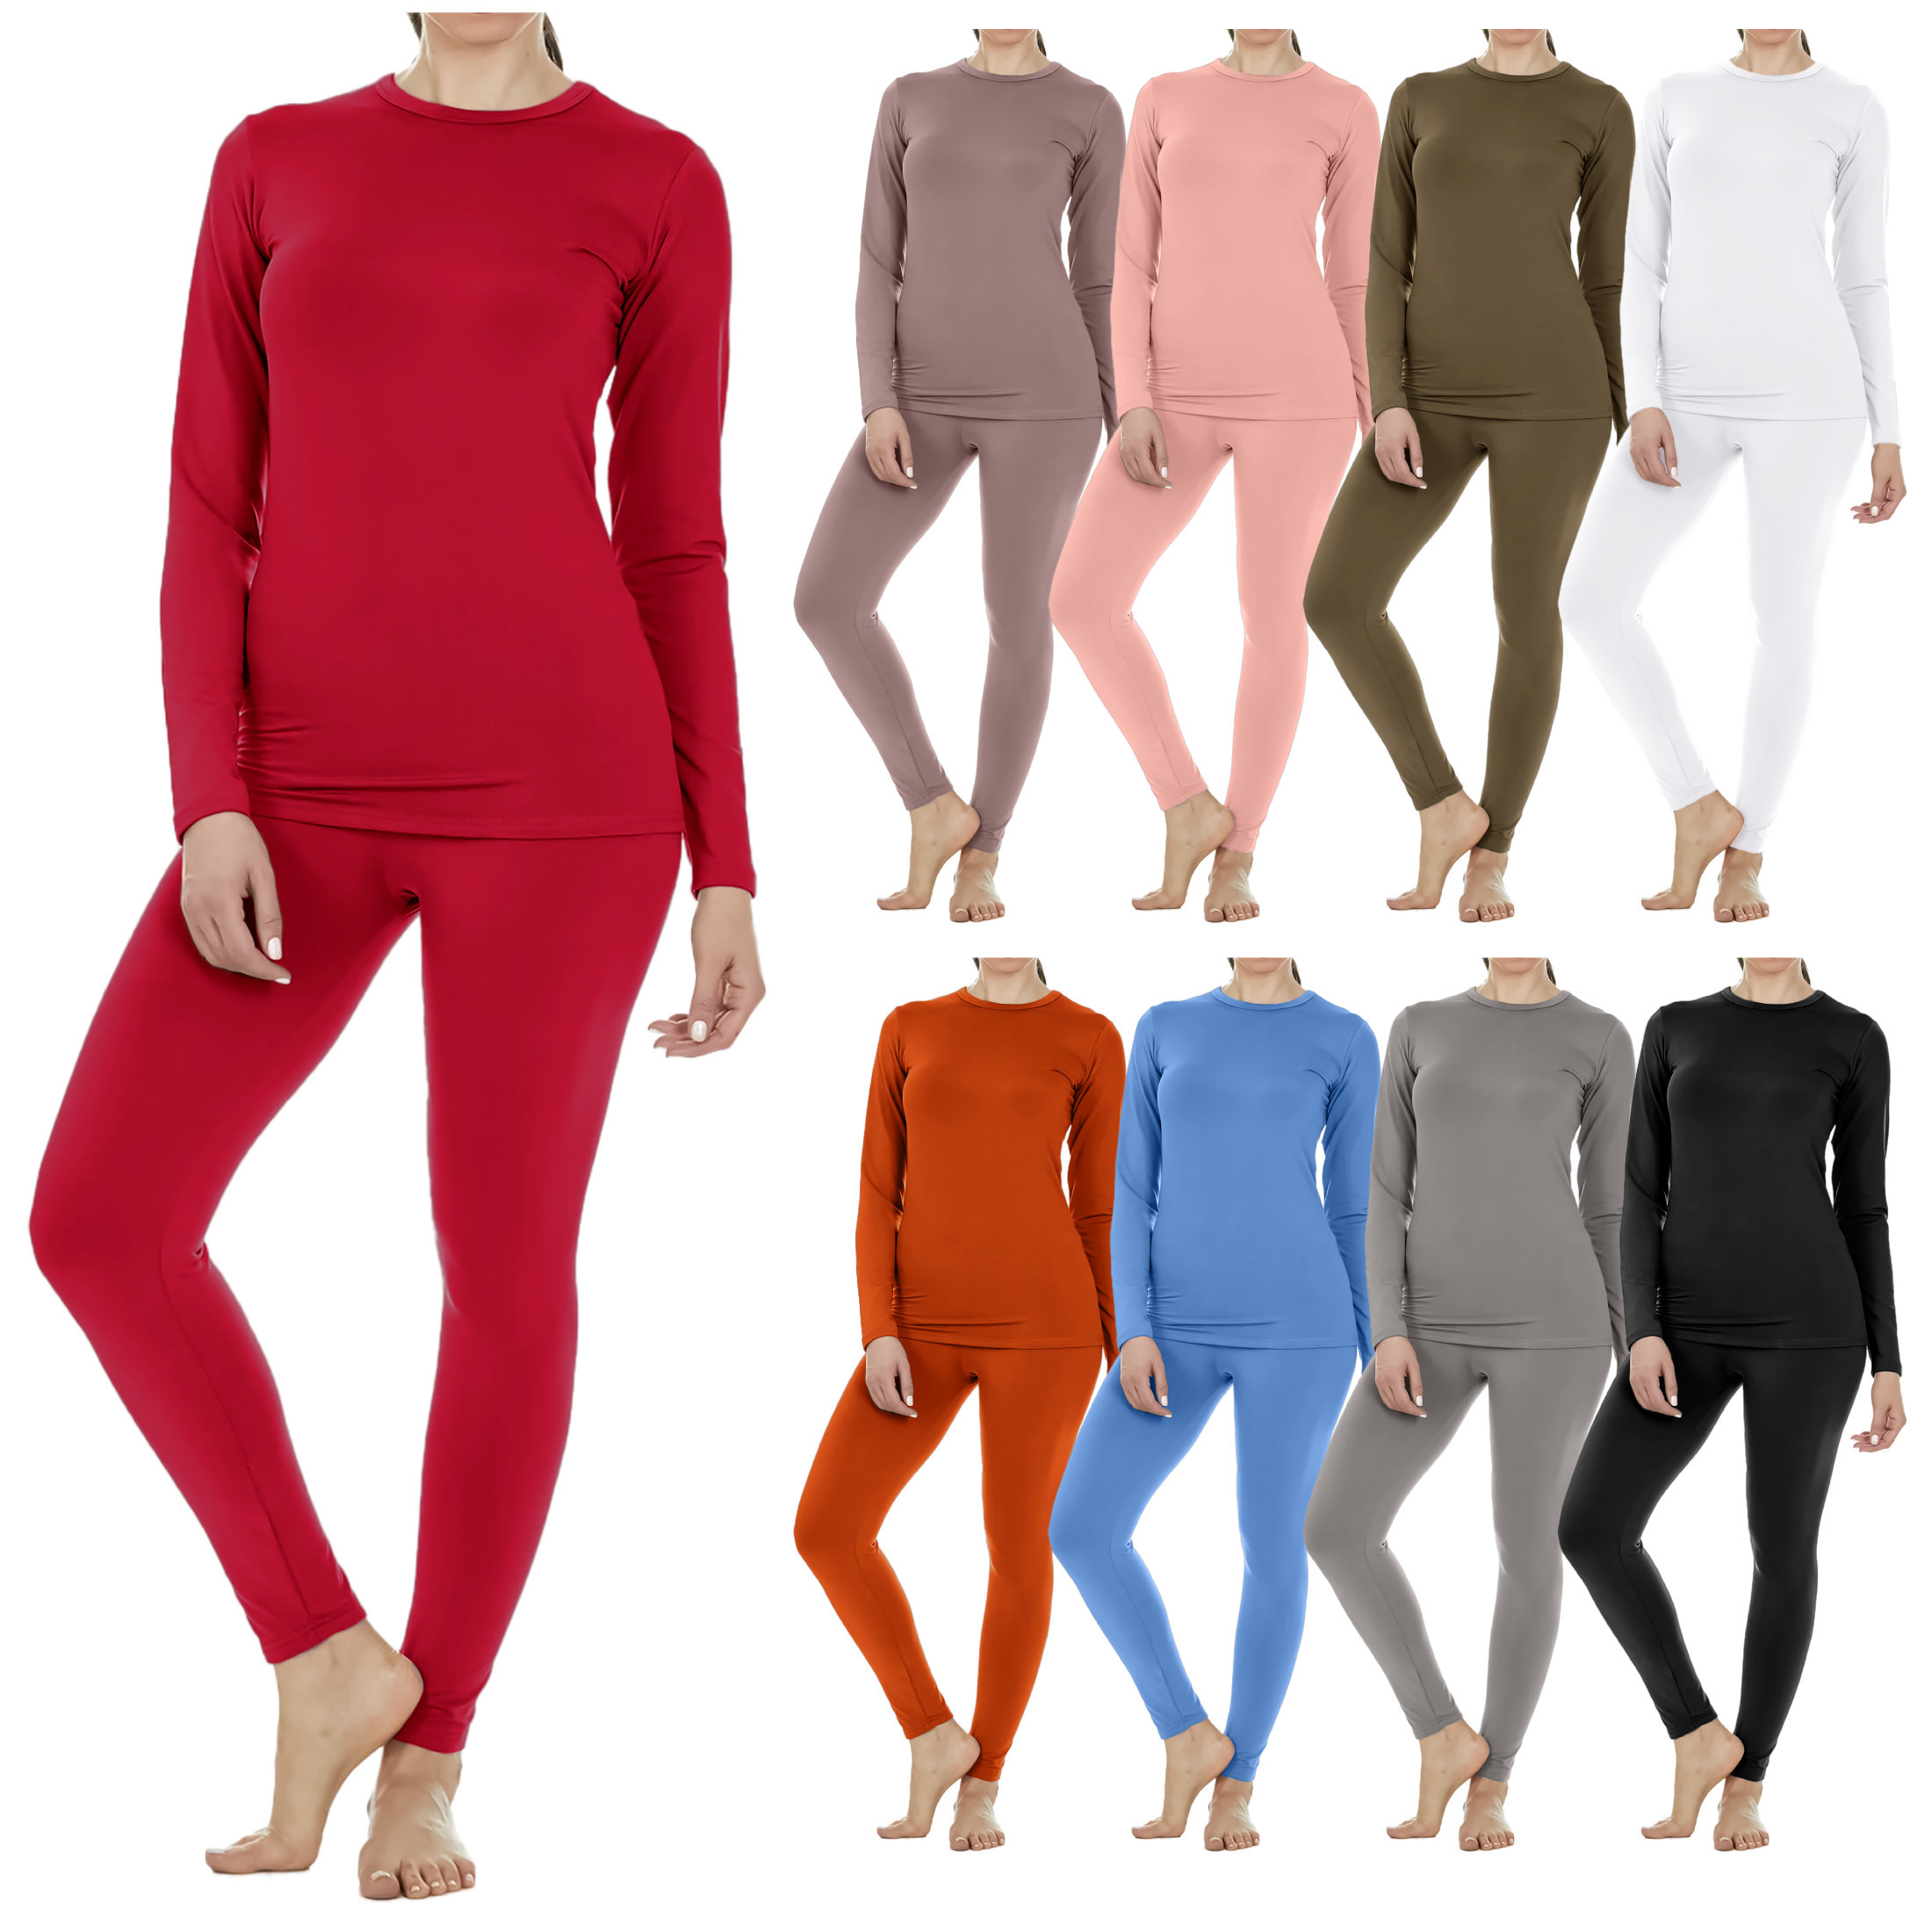 3 Sets: Women's Fleece Lined Thermal Sets For Cold Weather - 2X-Large